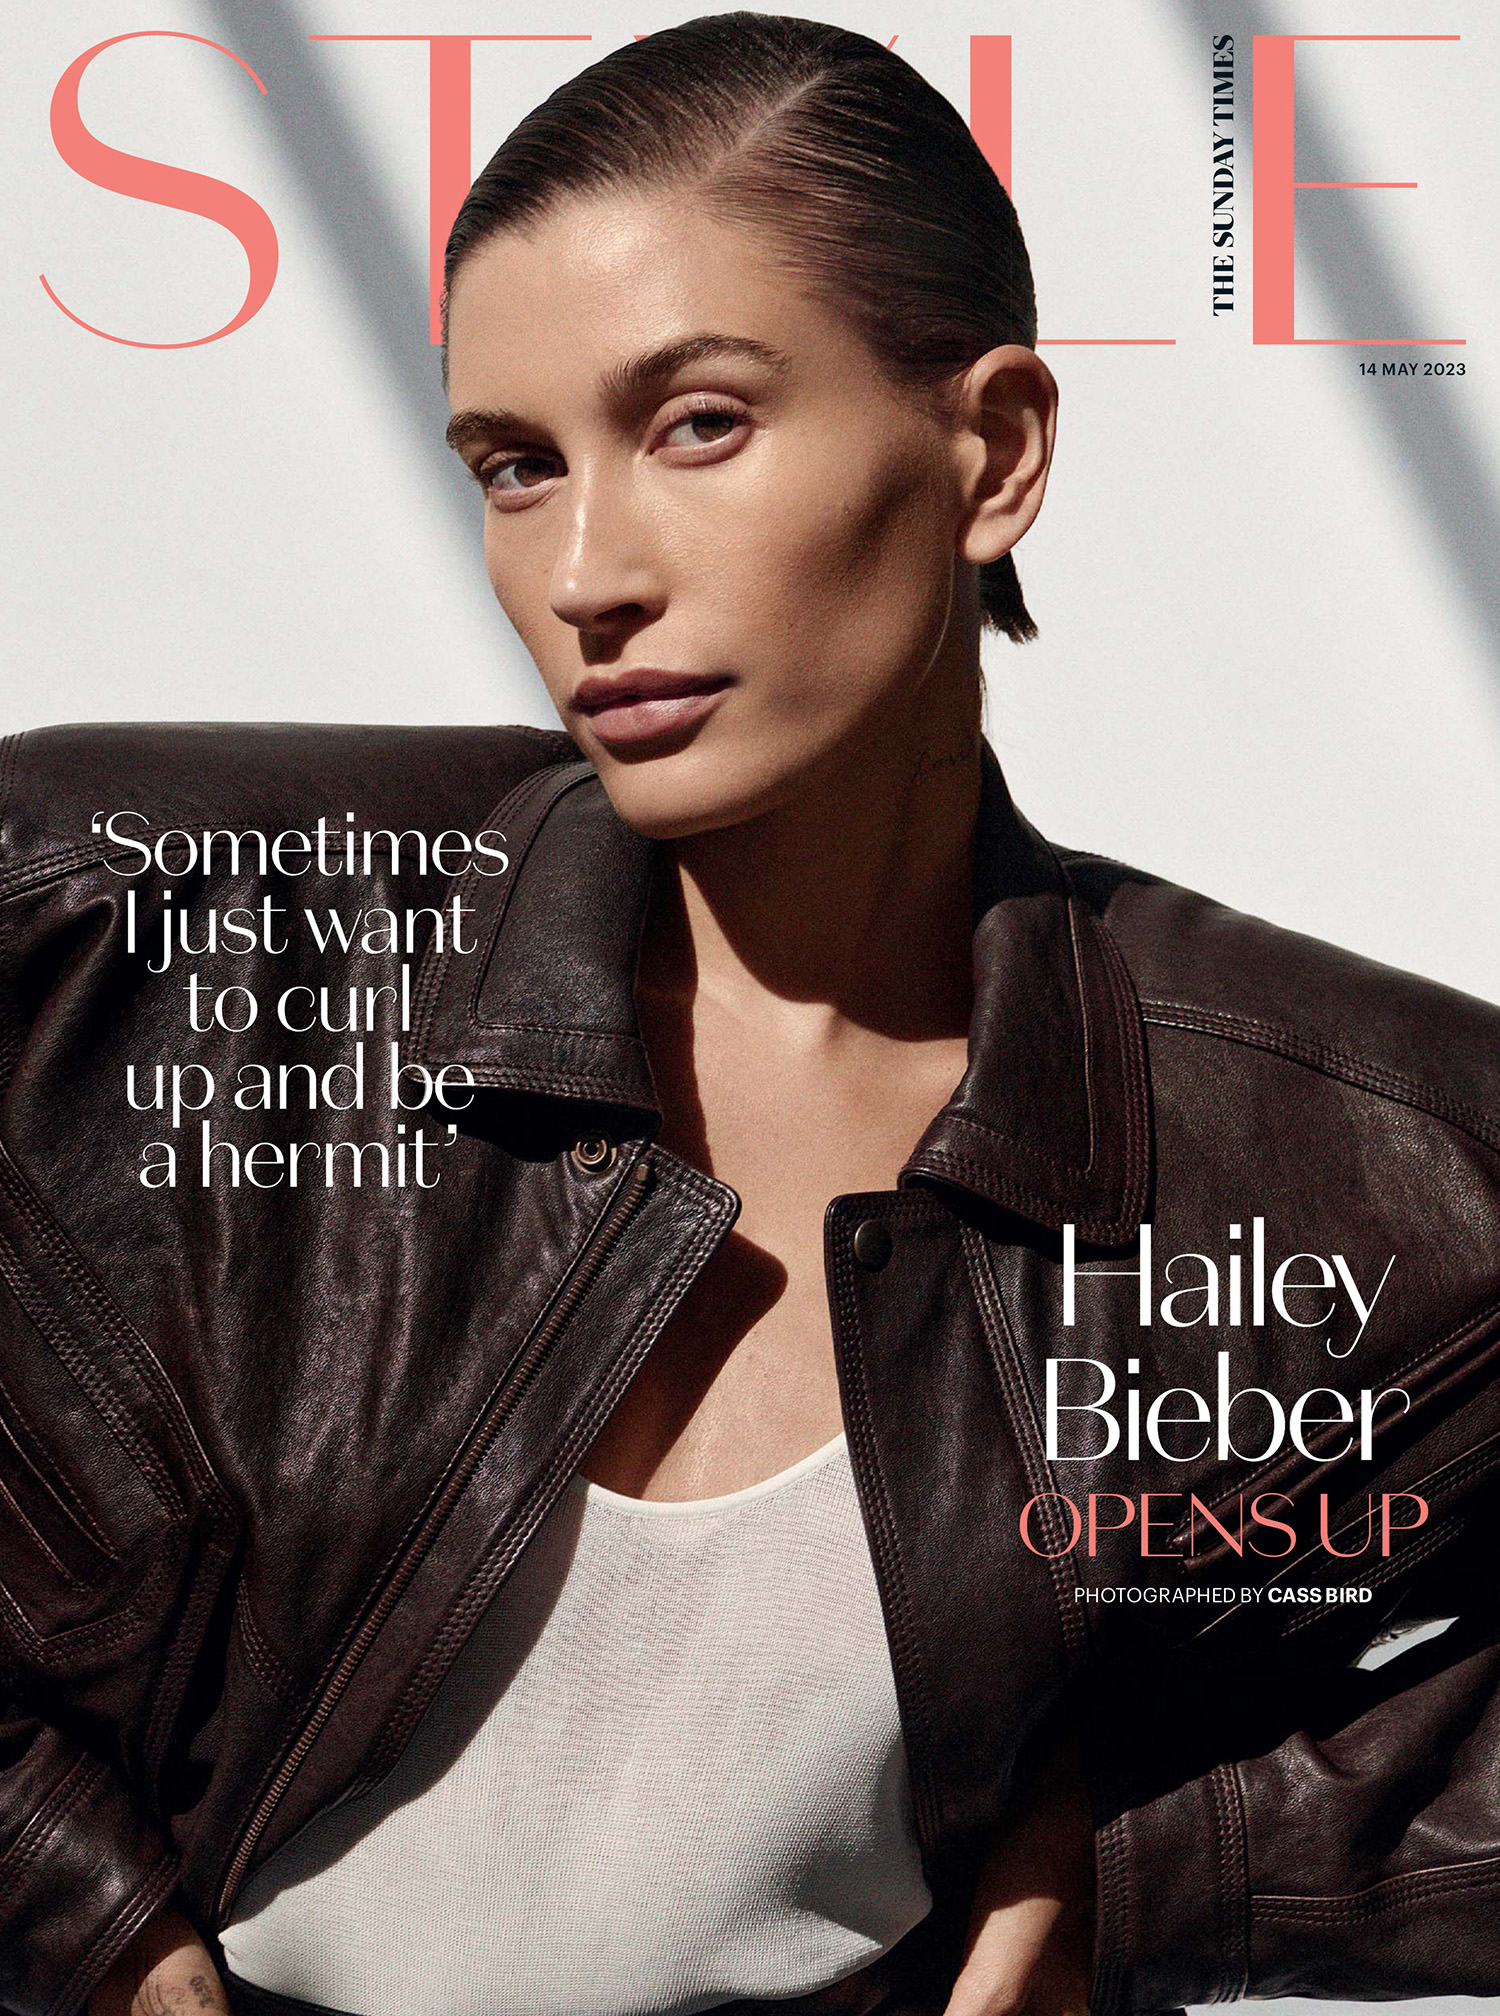 Hailey Bieber covers The Sunday Times Style May 14th, 2023 by Cass Bird